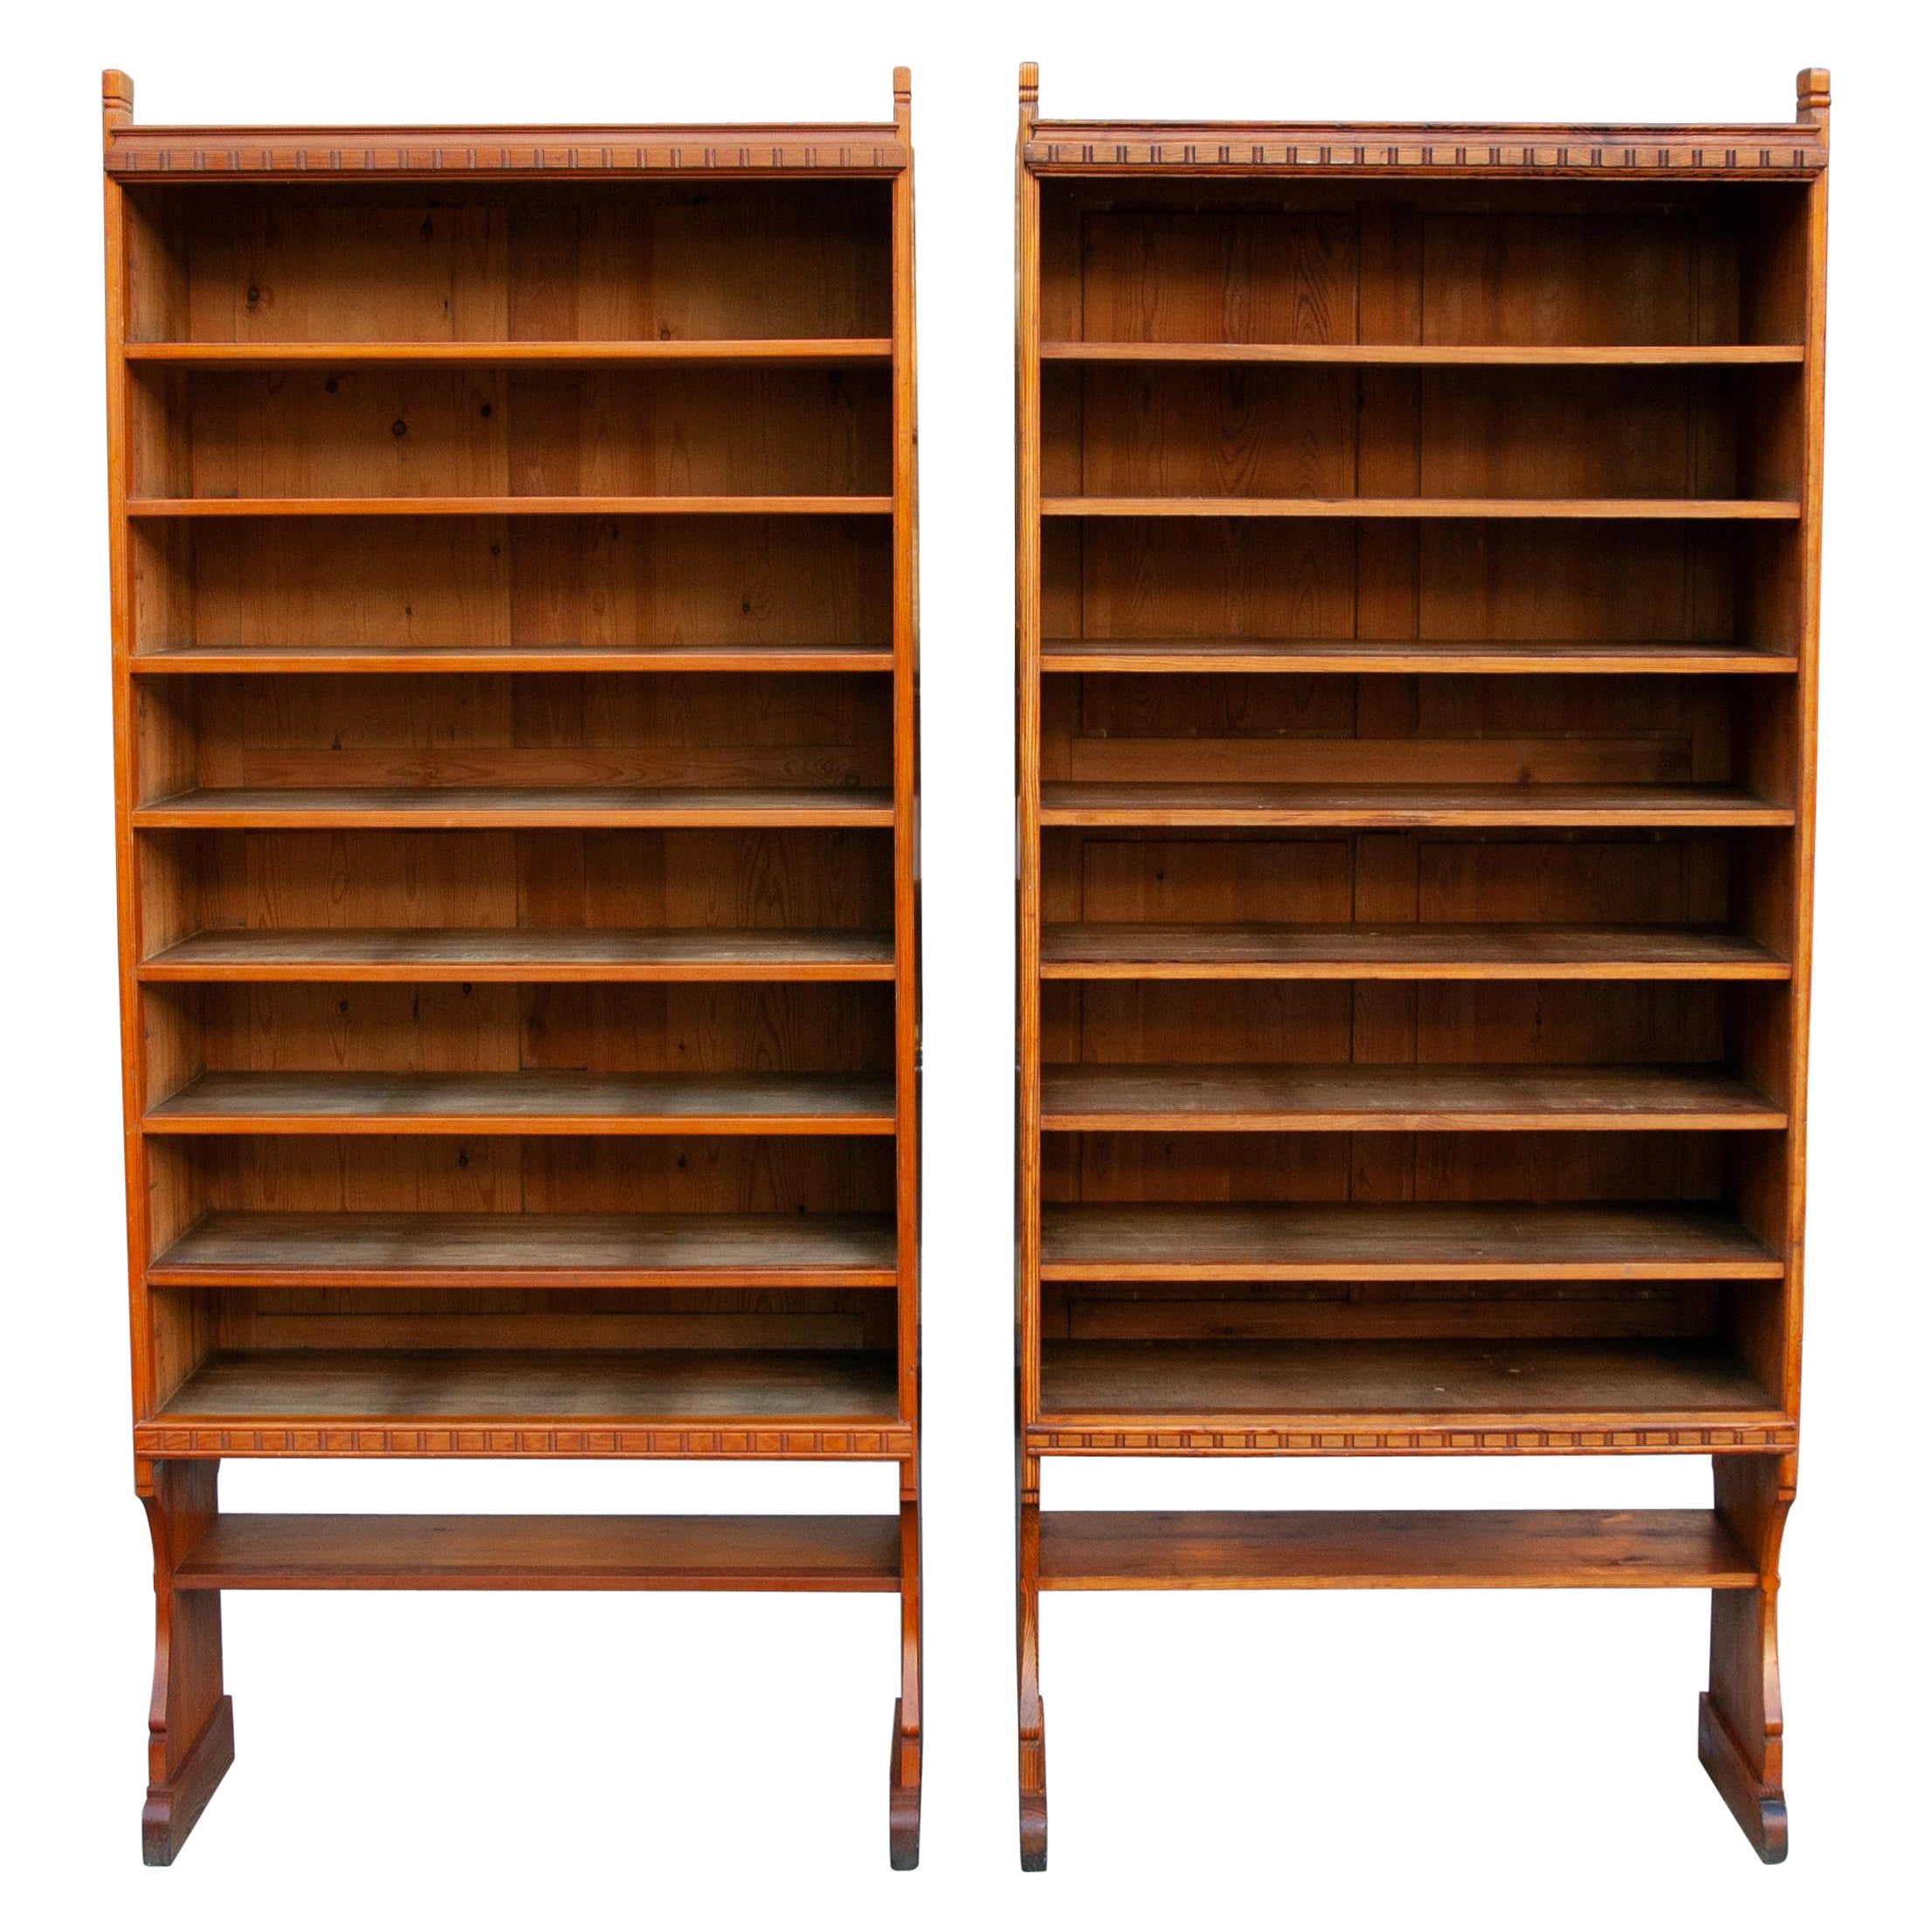 Pair of Skønvirke Cabinets, by Martin Nyrop Denmark, 1900 For Sale